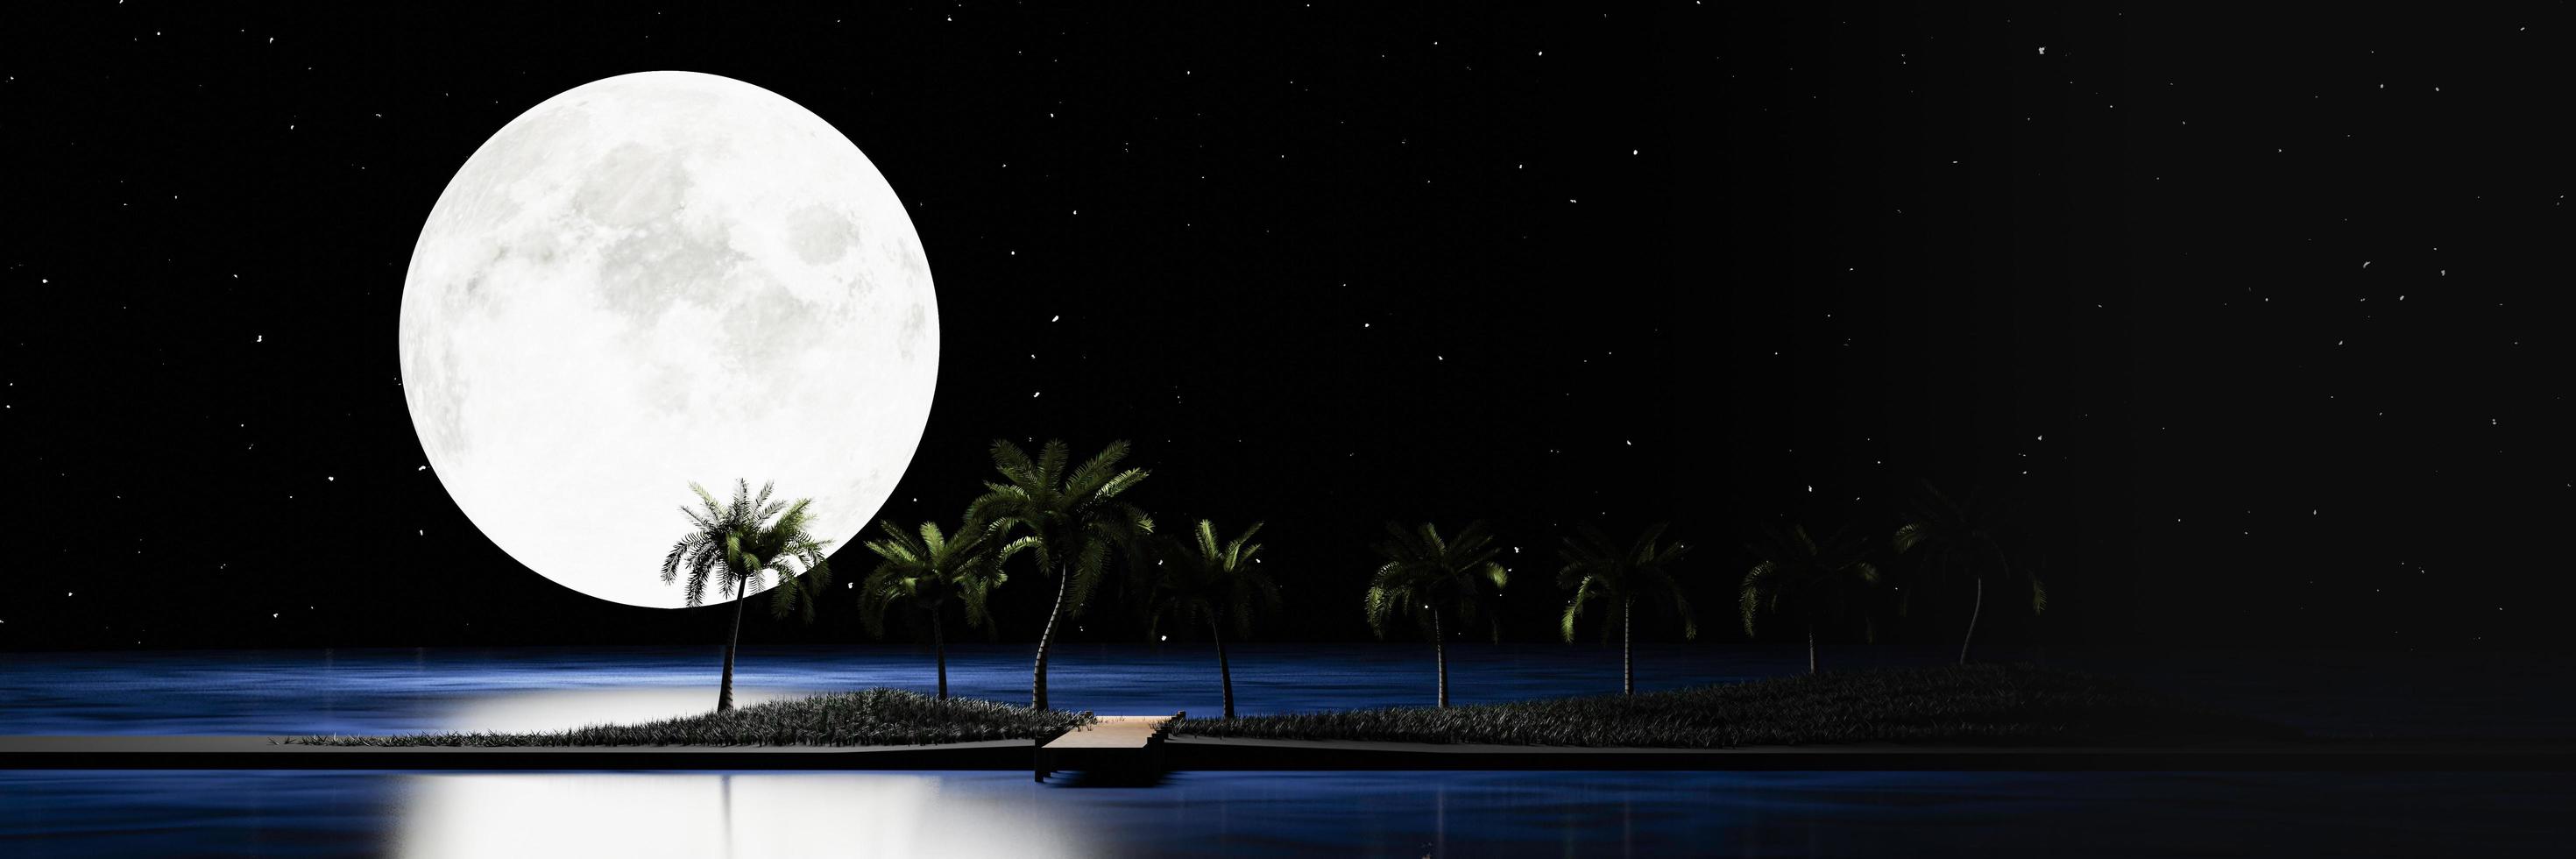 Full moon night, many stars fill the sky. A wooden bridge extends down to the sea or the pier, with coconut trees along the way. Romantic scene by the sea on a full moon wooden bridge. 3D rendering. photo